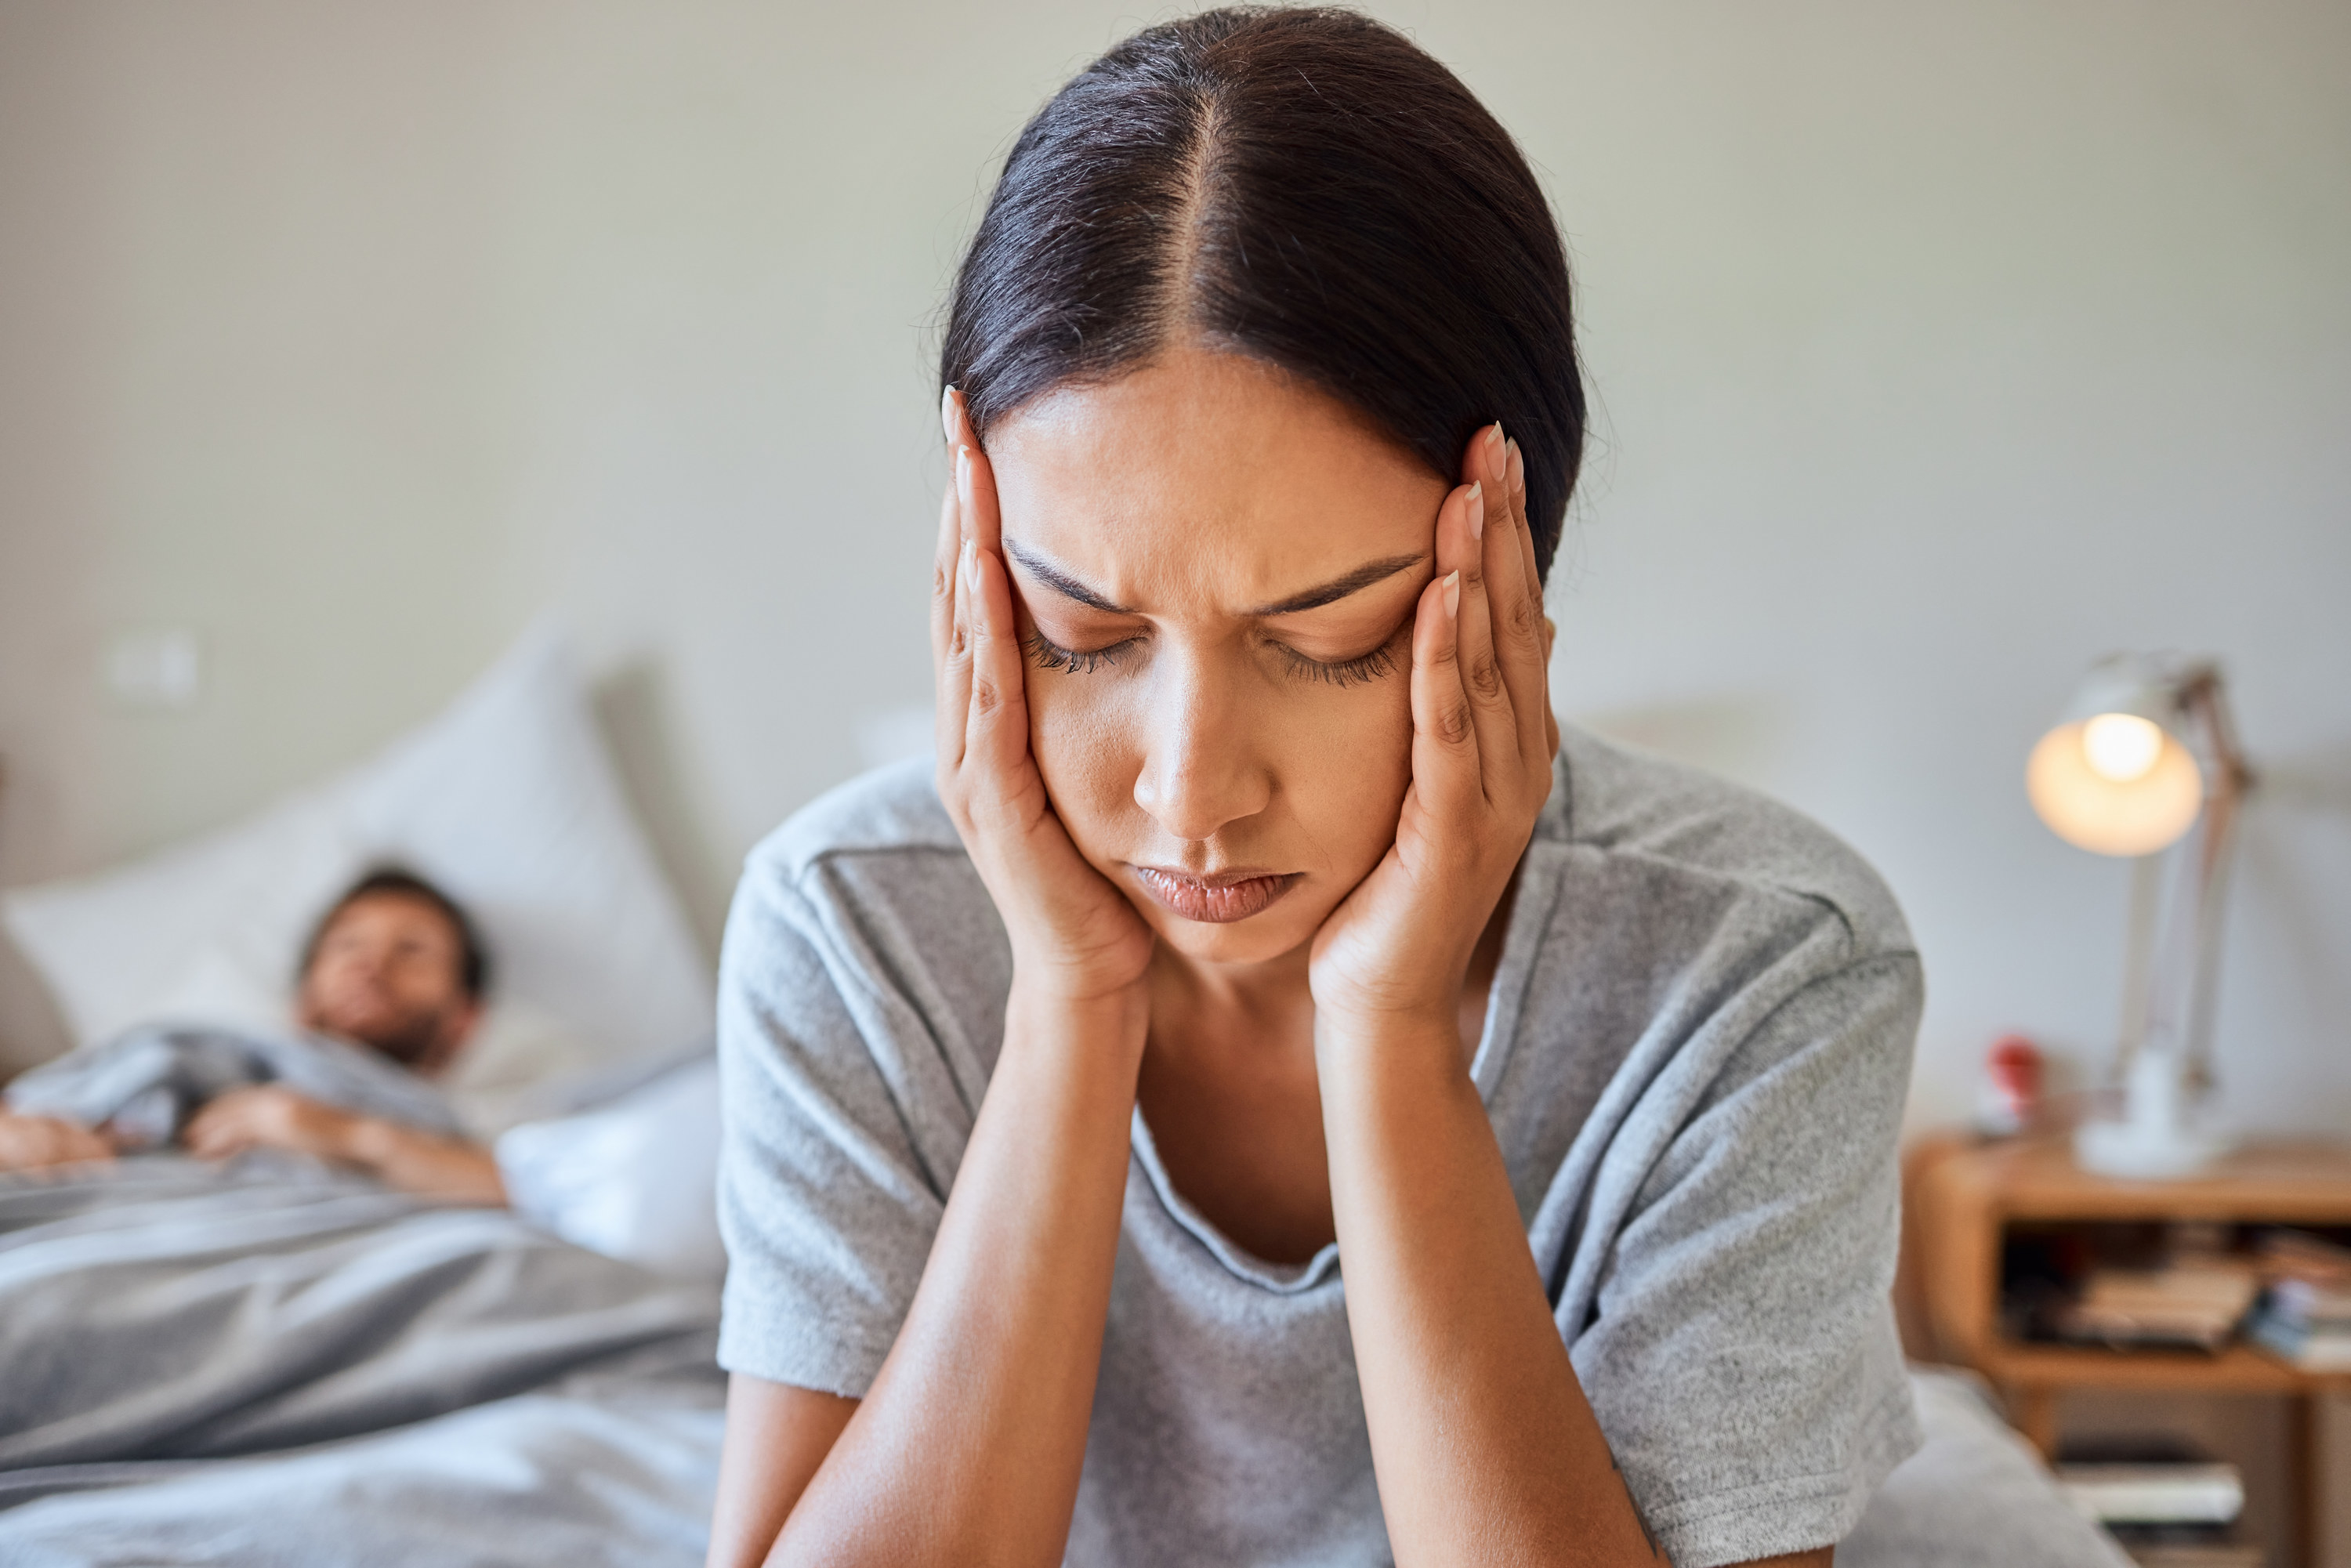 Woman stressing out while partner sleeps in bed behind her